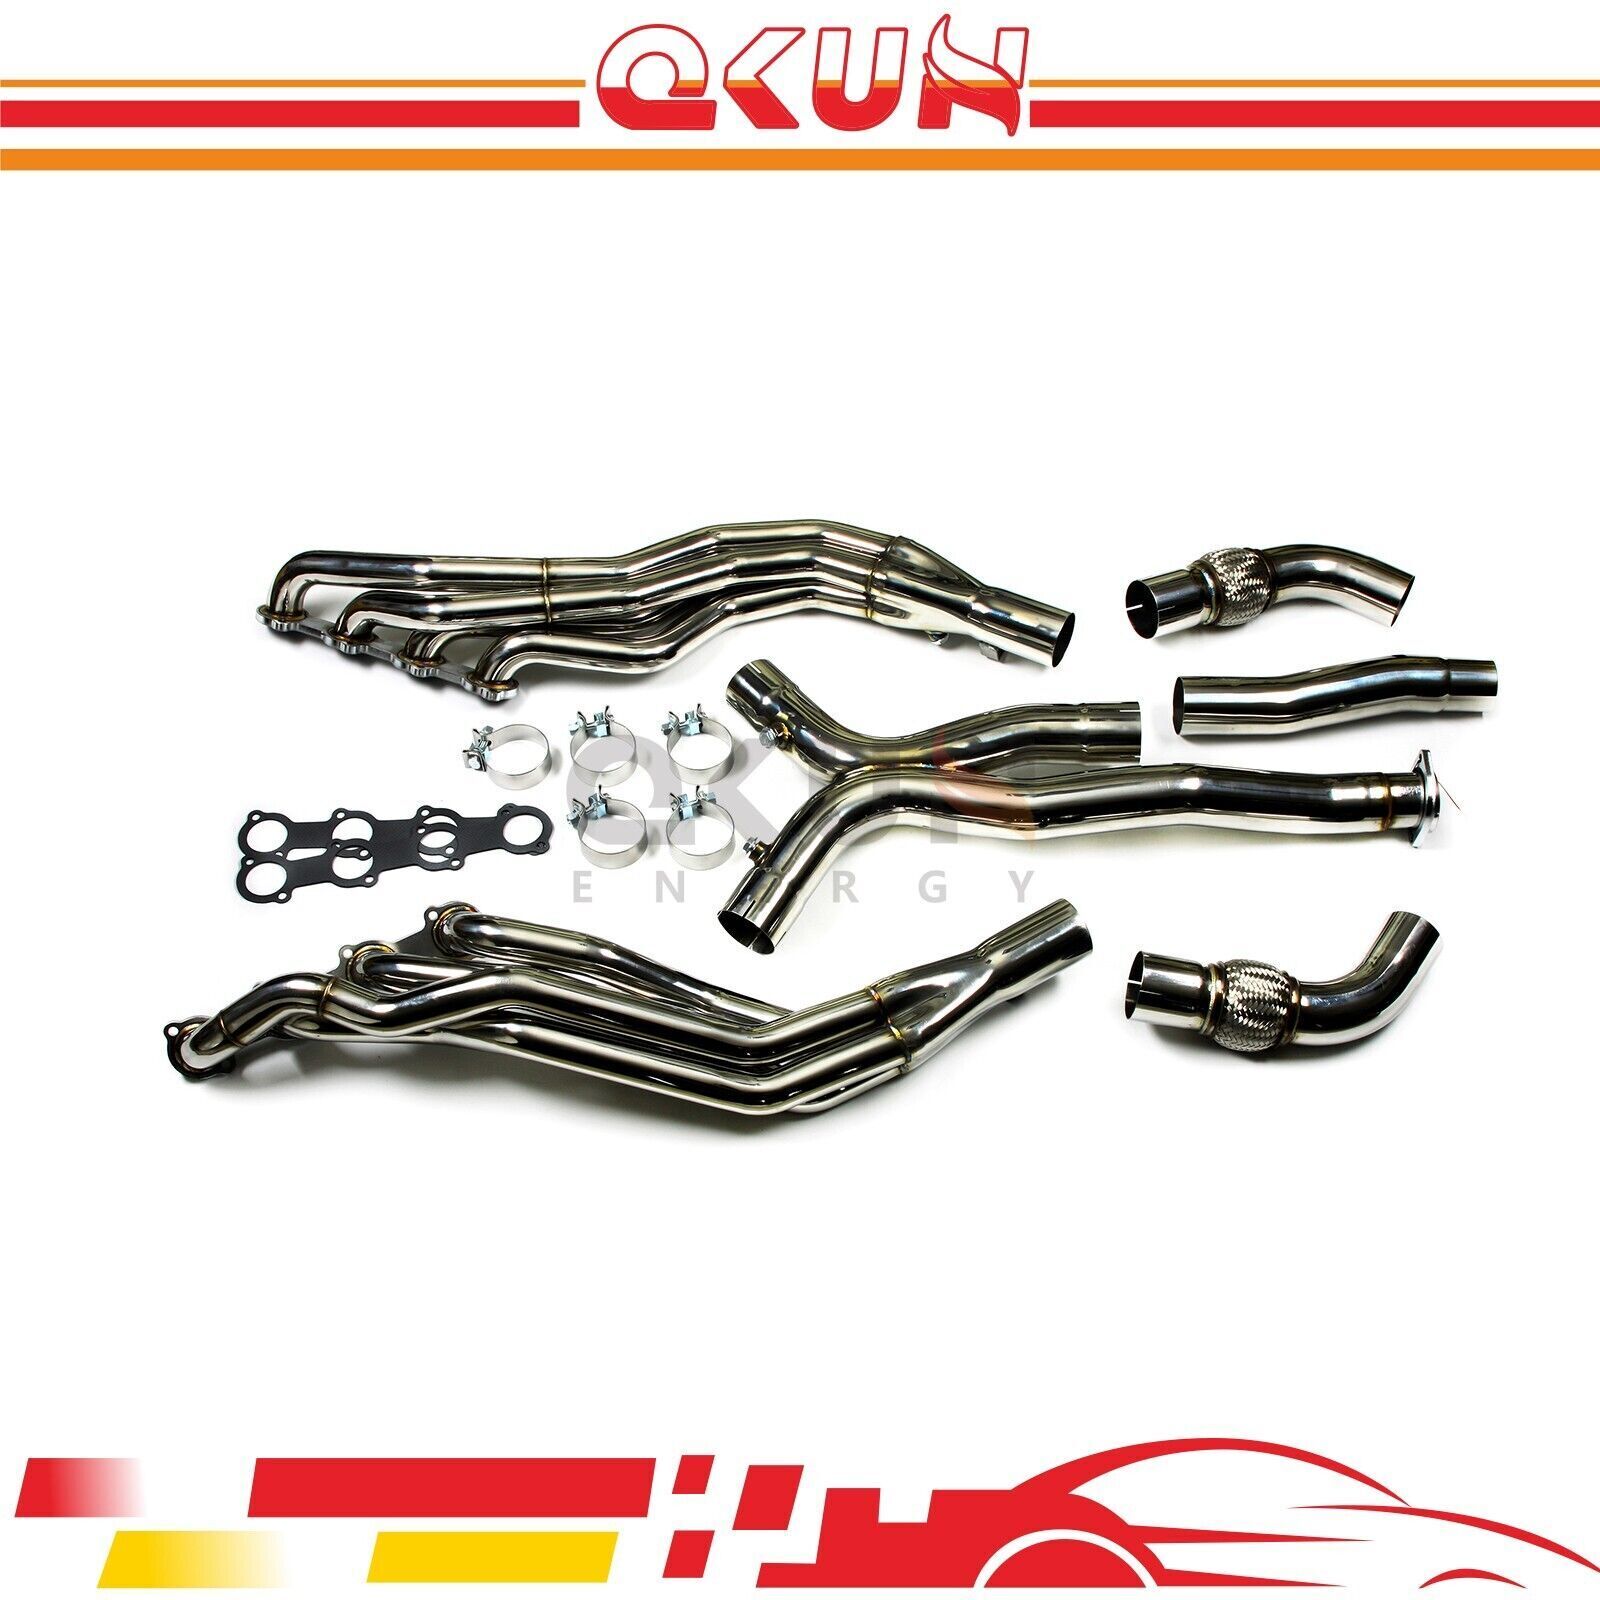 Exhaust Long Headers for 2003 2004 2005 2006 Mercedes MK113 CLS55 AMG 5.4L